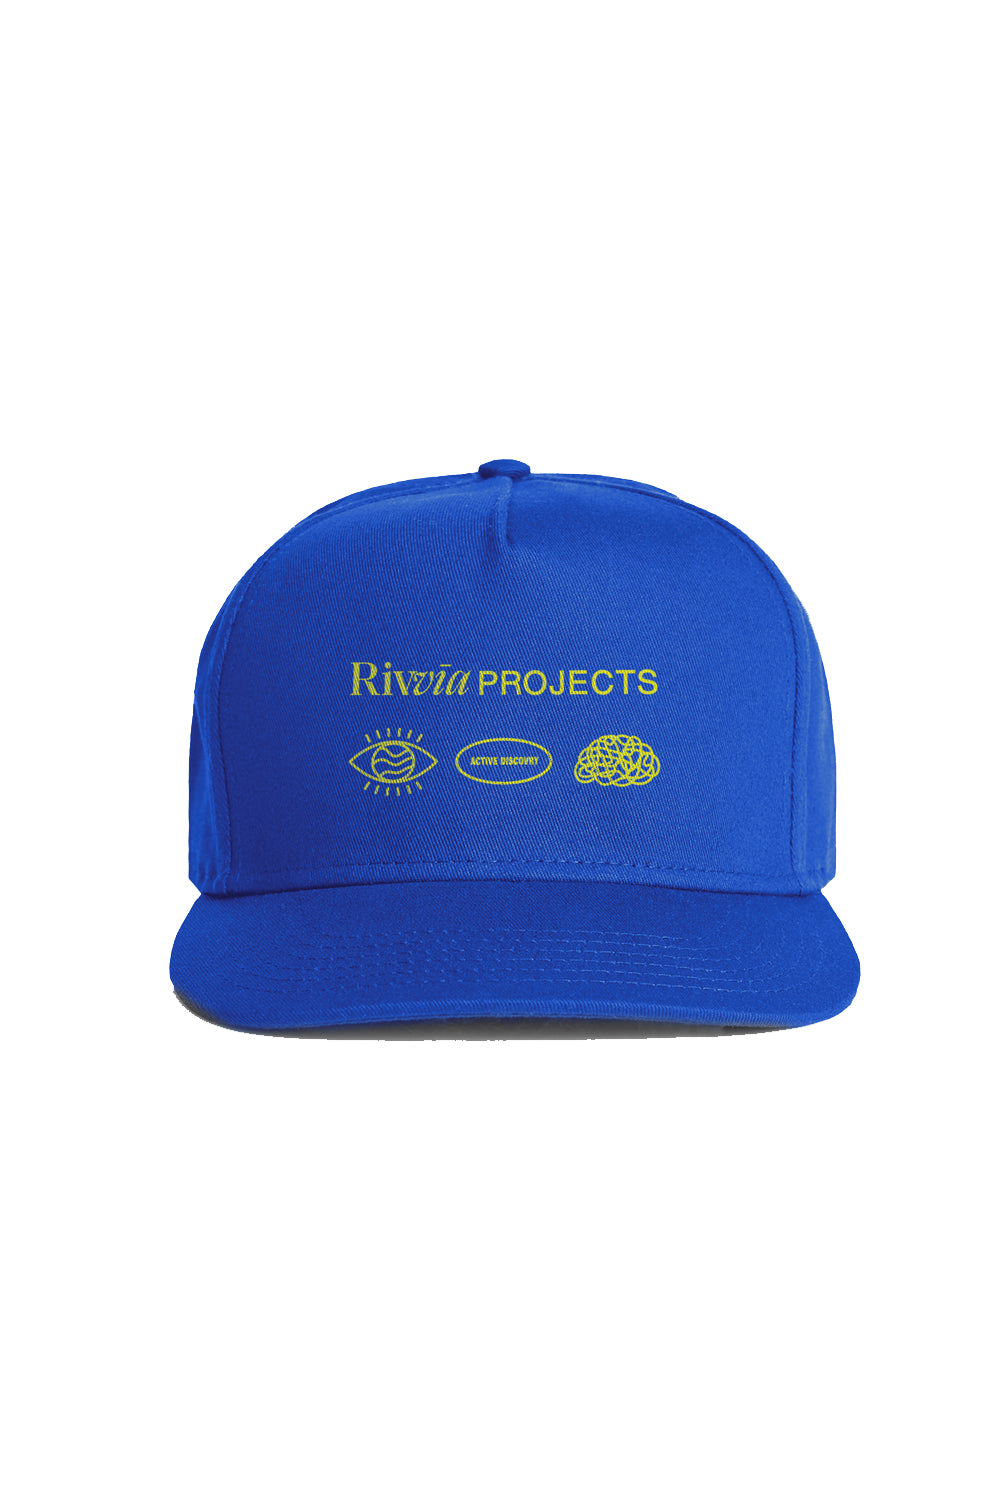 Rivvia Projects 'Projects' Cap